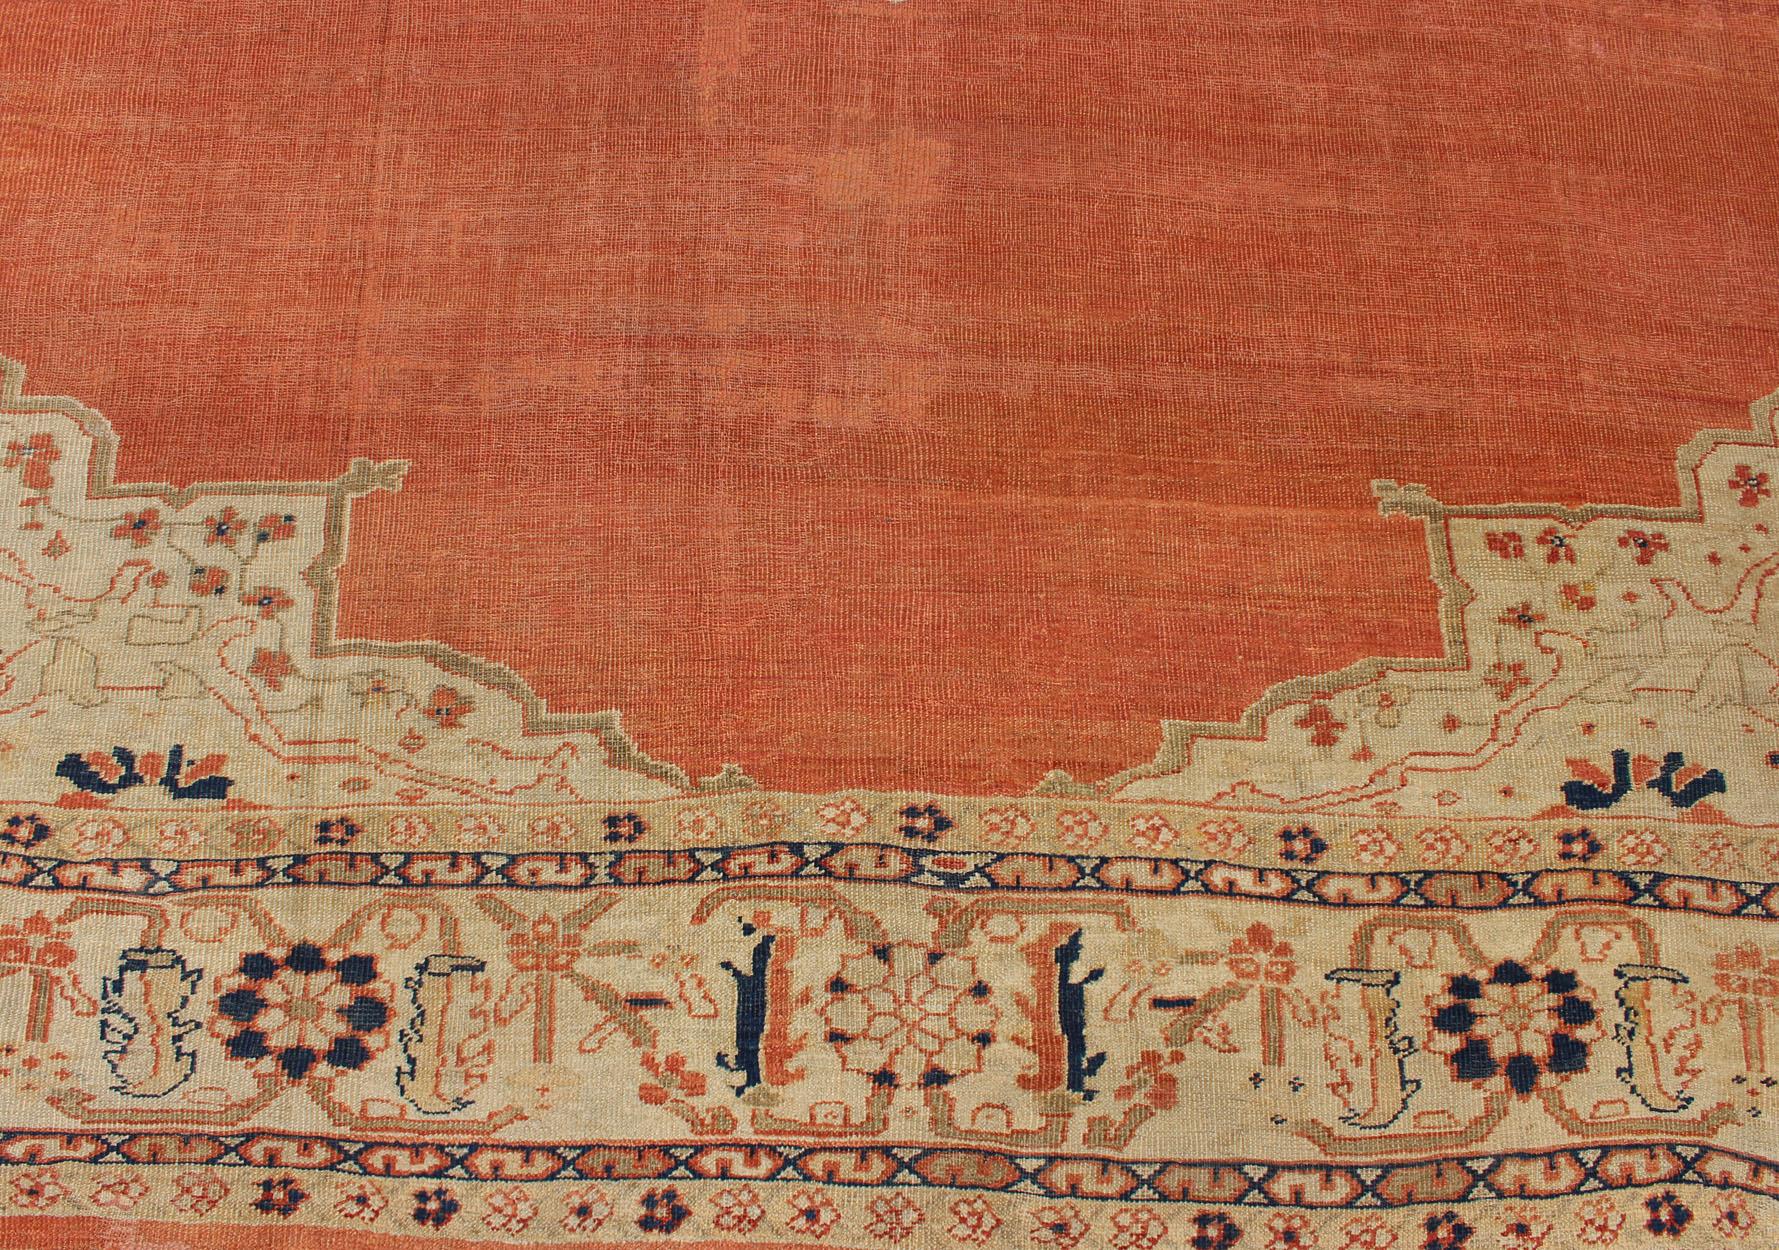 Antique Large Ziegler Sultanabad Rug in Soft Orange, Cream and Navy Blue For Sale 6